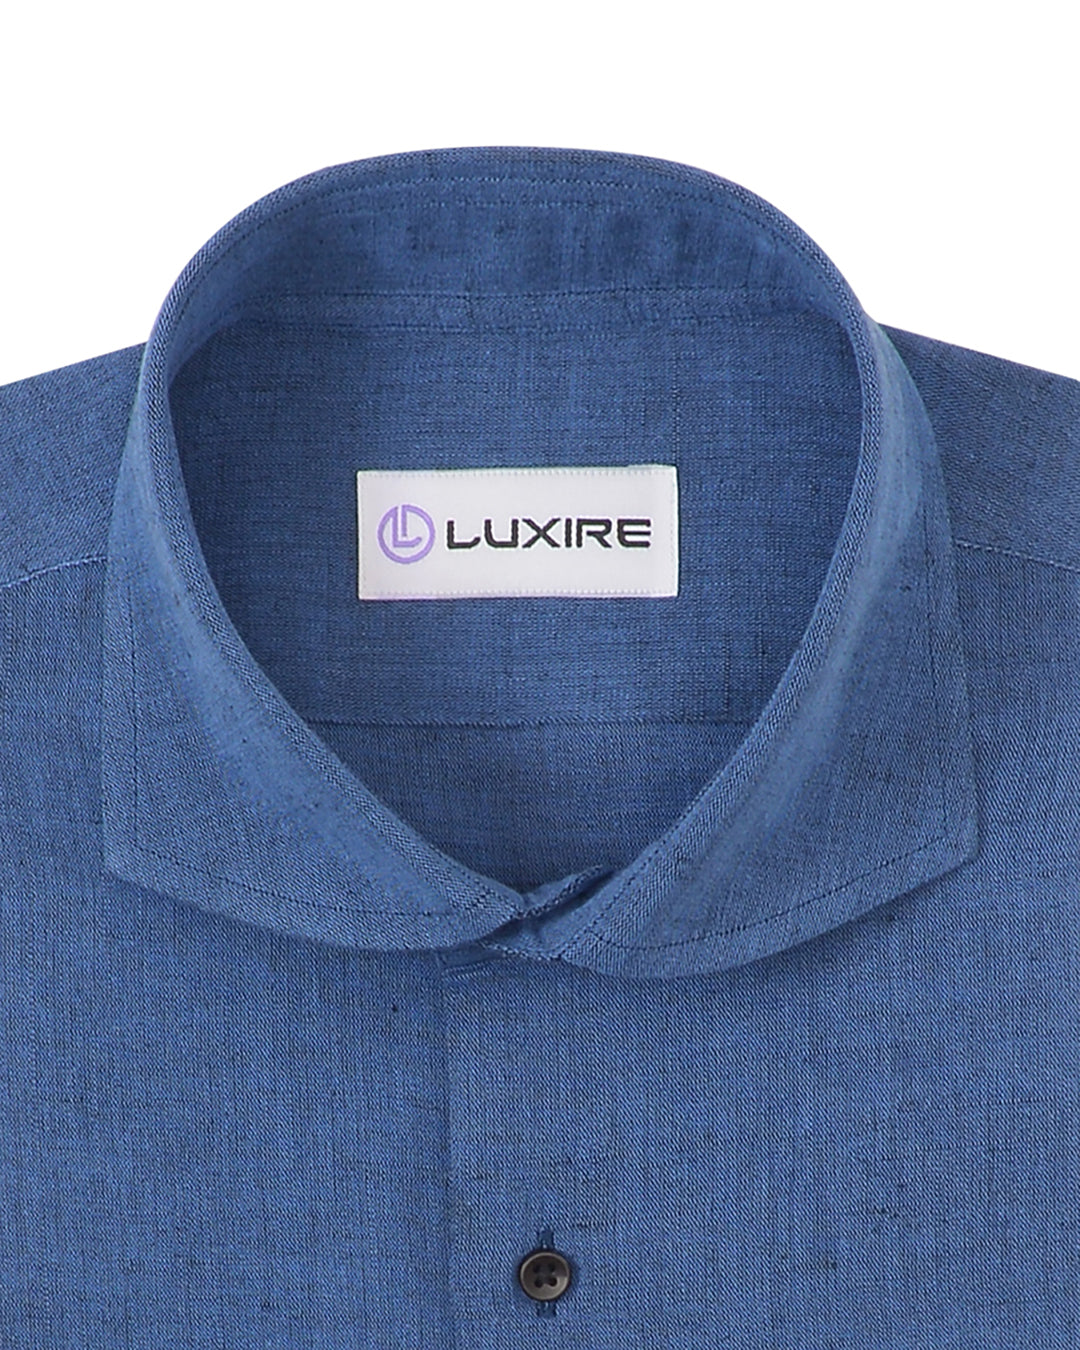 Collar of the custom linen shirt for men in dark blue chambray by Luxire Clothing